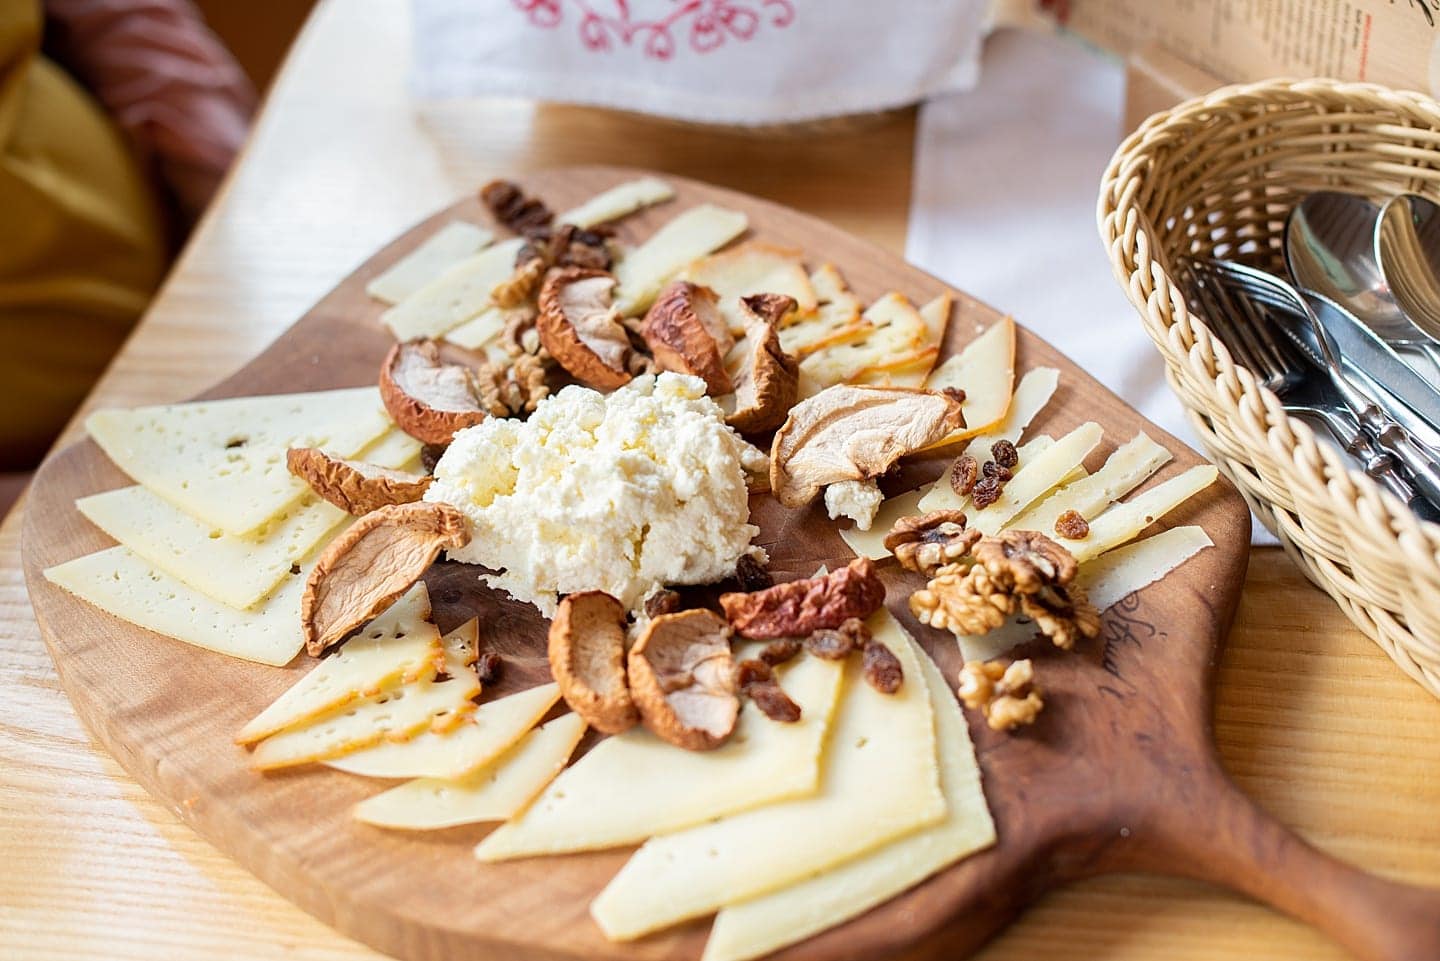 15 Traditional Slovenian Foods to Delight Your Tastebuds